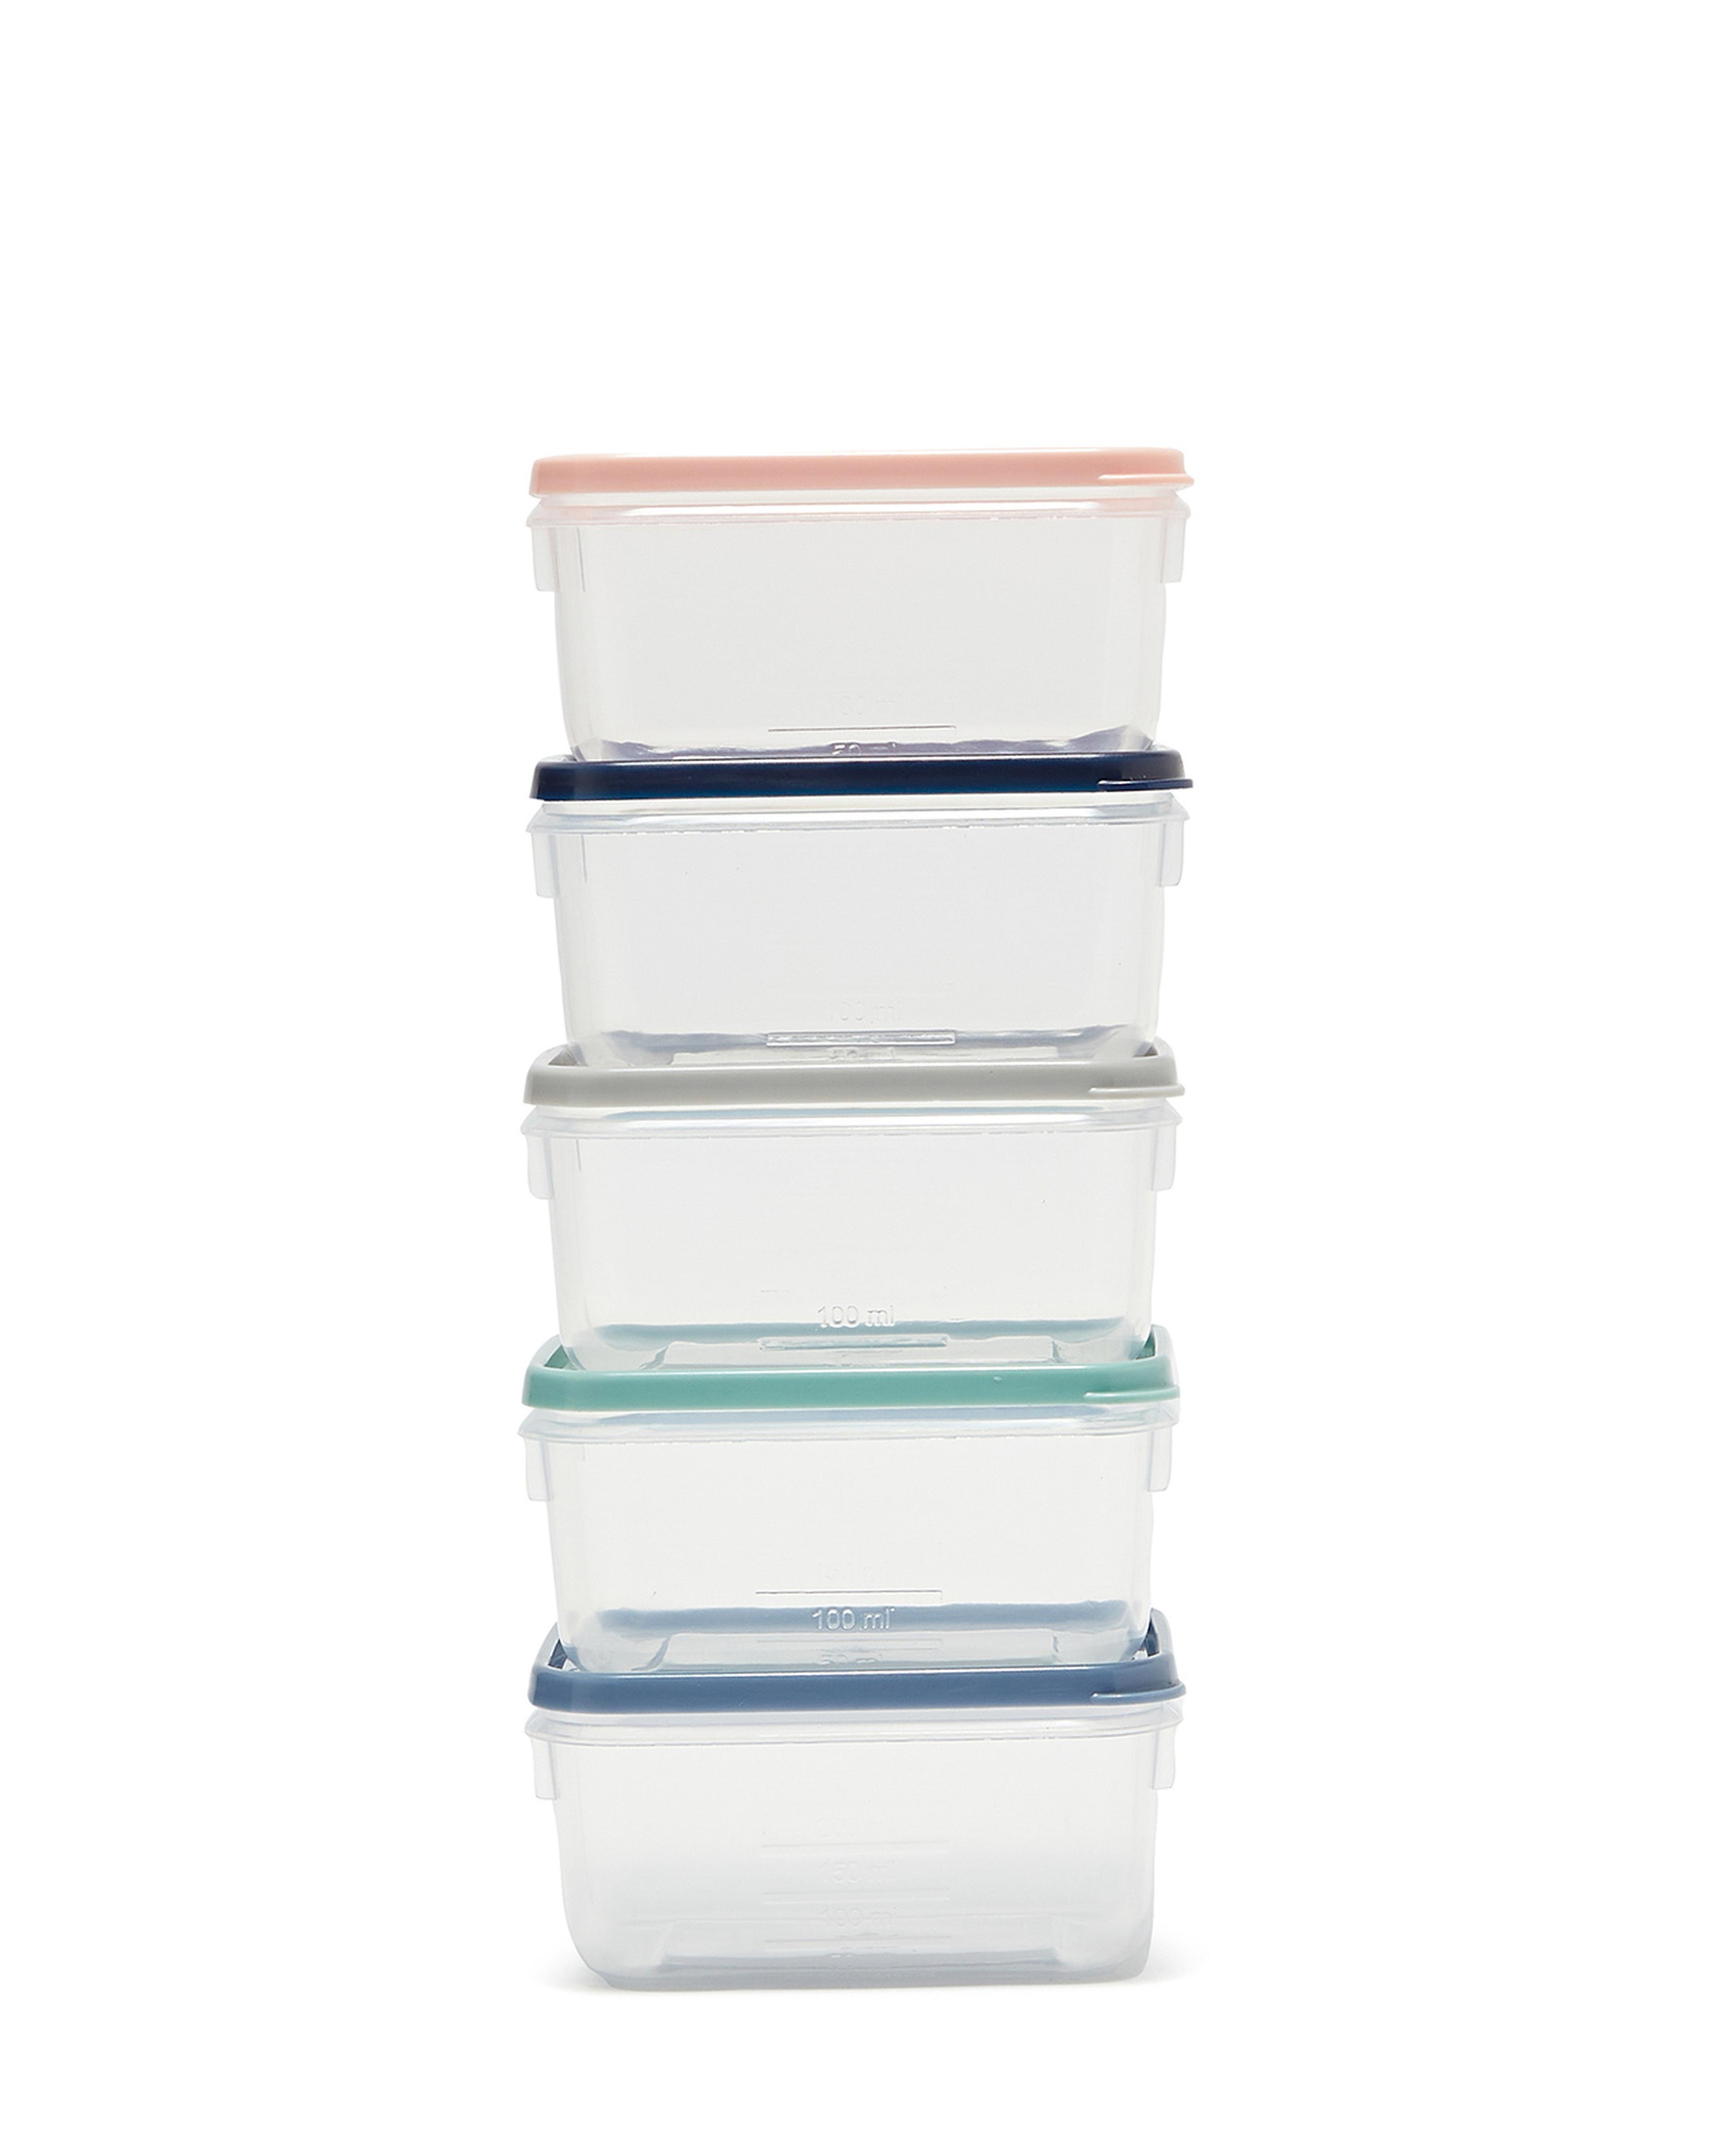 Pack of 5 Food Containers